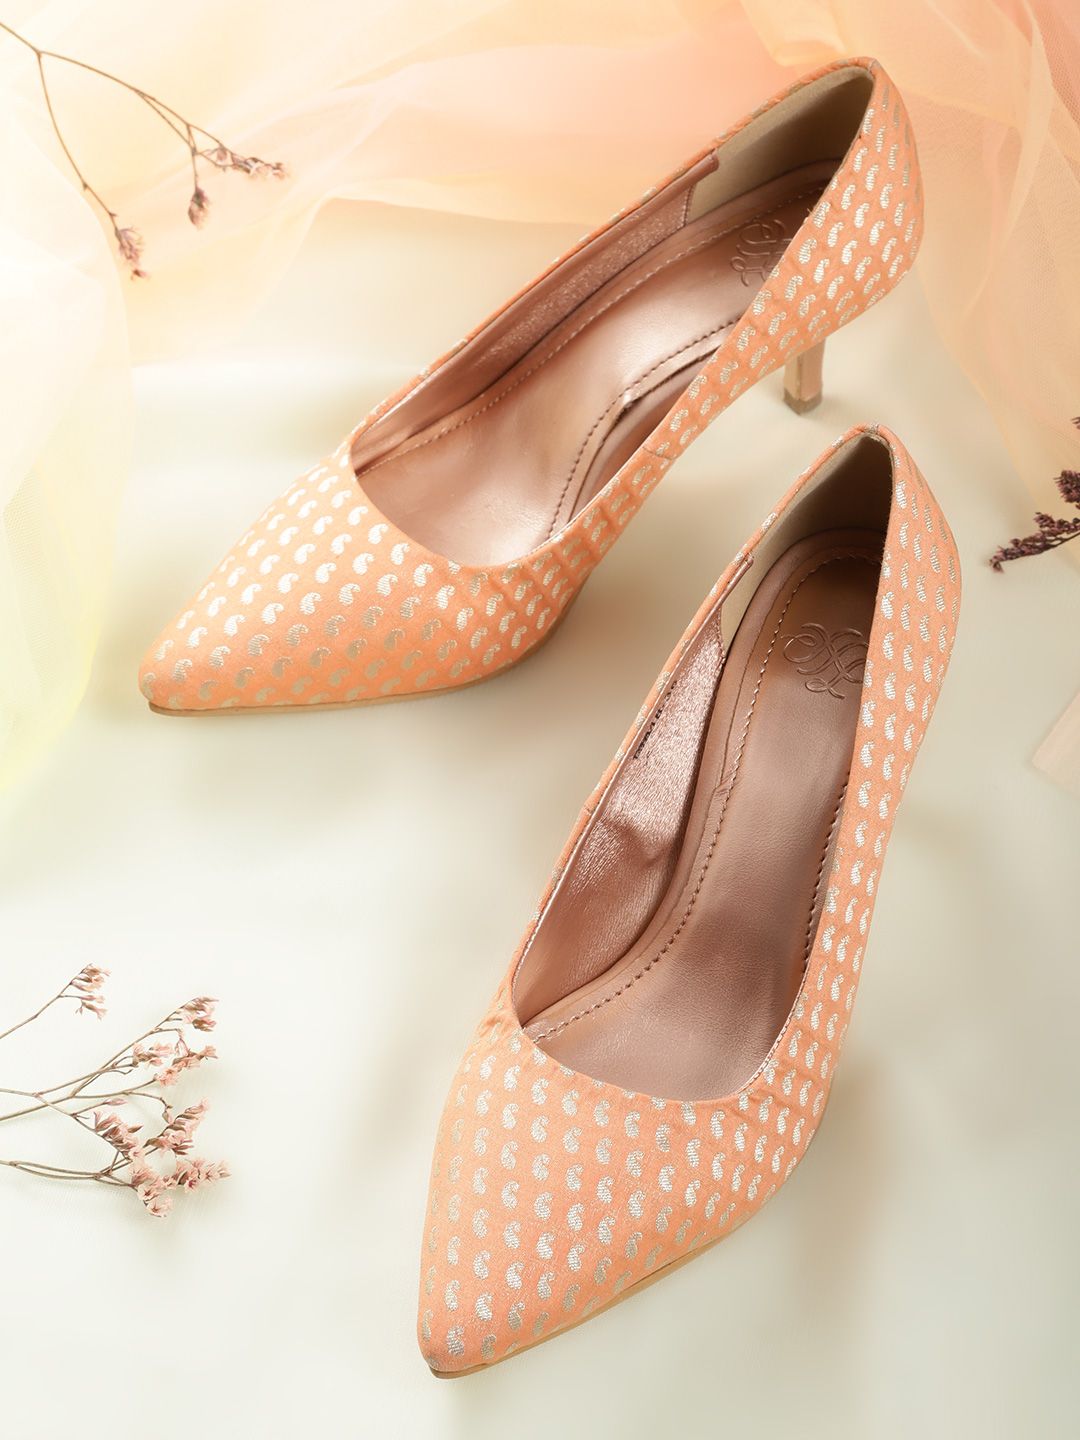 House of Pataudi Women Peach-Coloured & Gold-Toned Paisley Handcrafted Woven Design Pumps Price in India